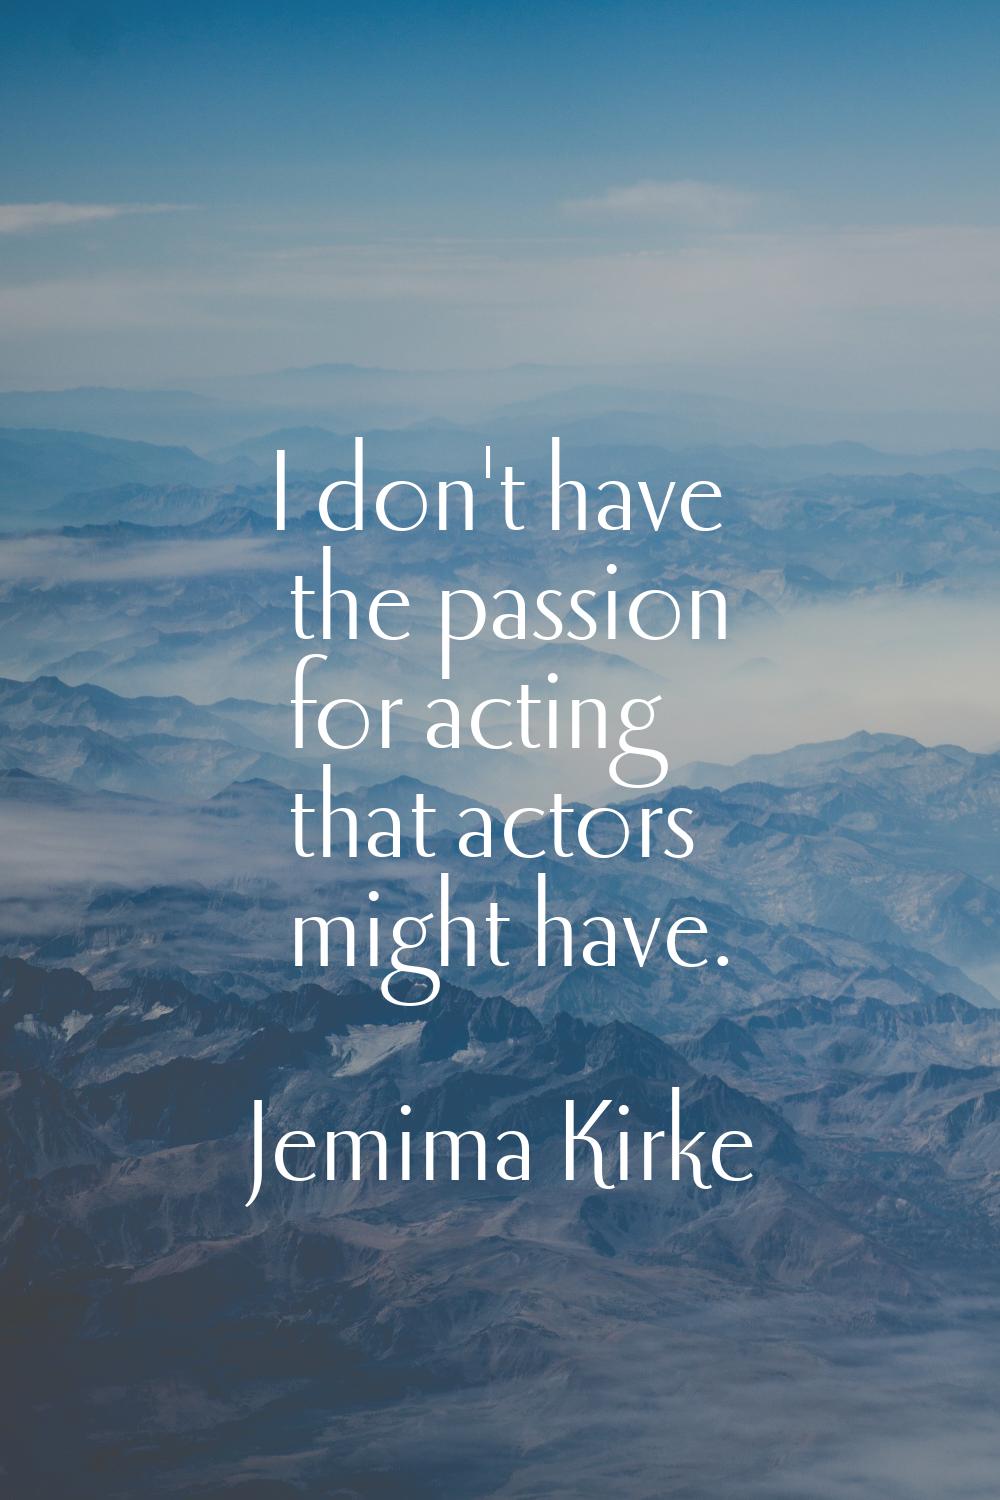 I don't have the passion for acting that actors might have.